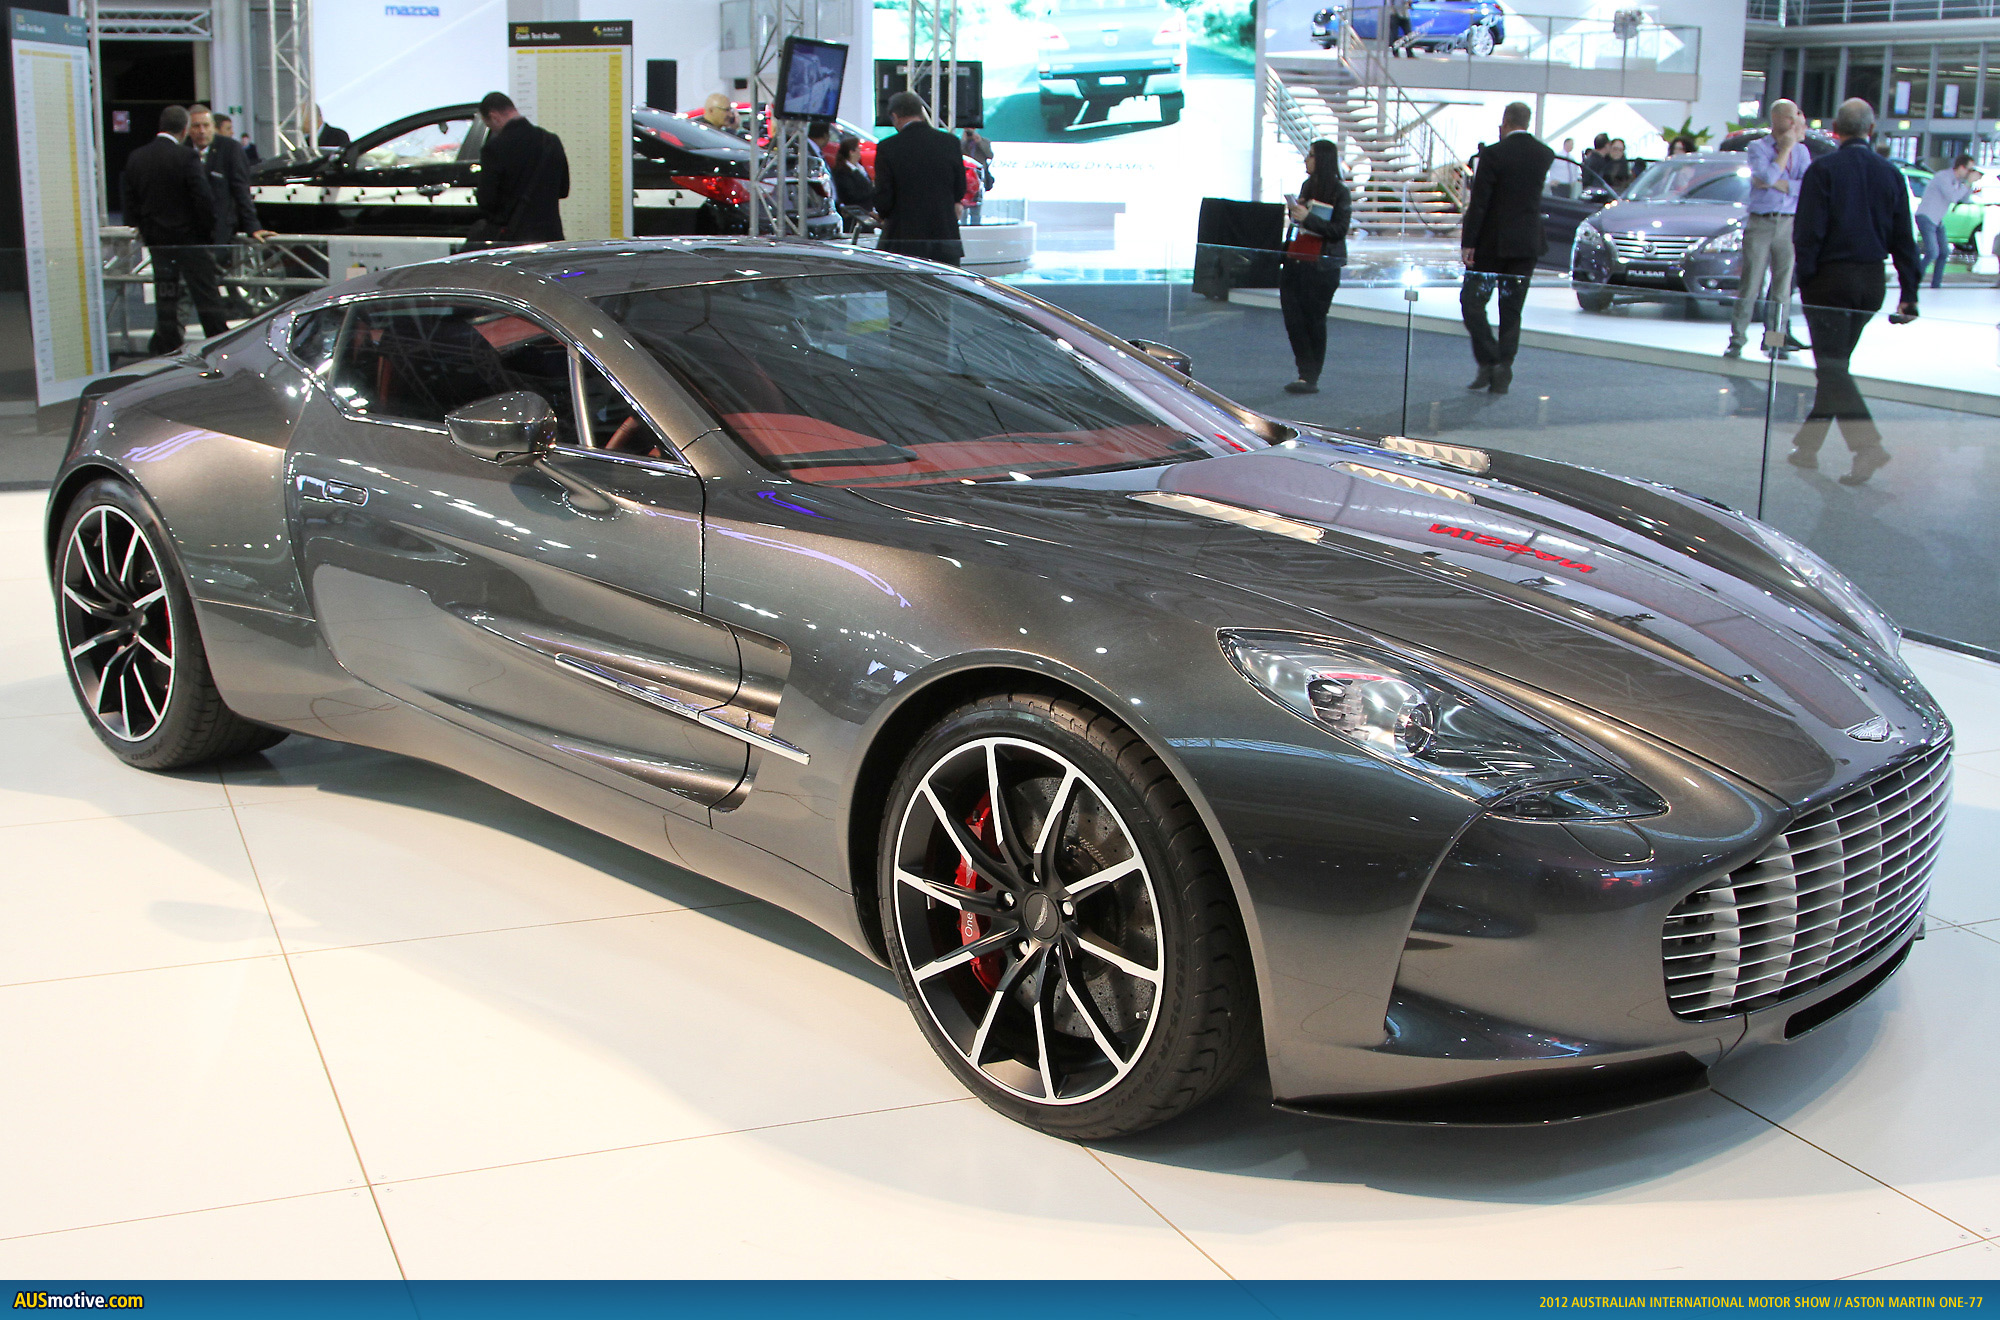 Did ford ever own aston martin #1